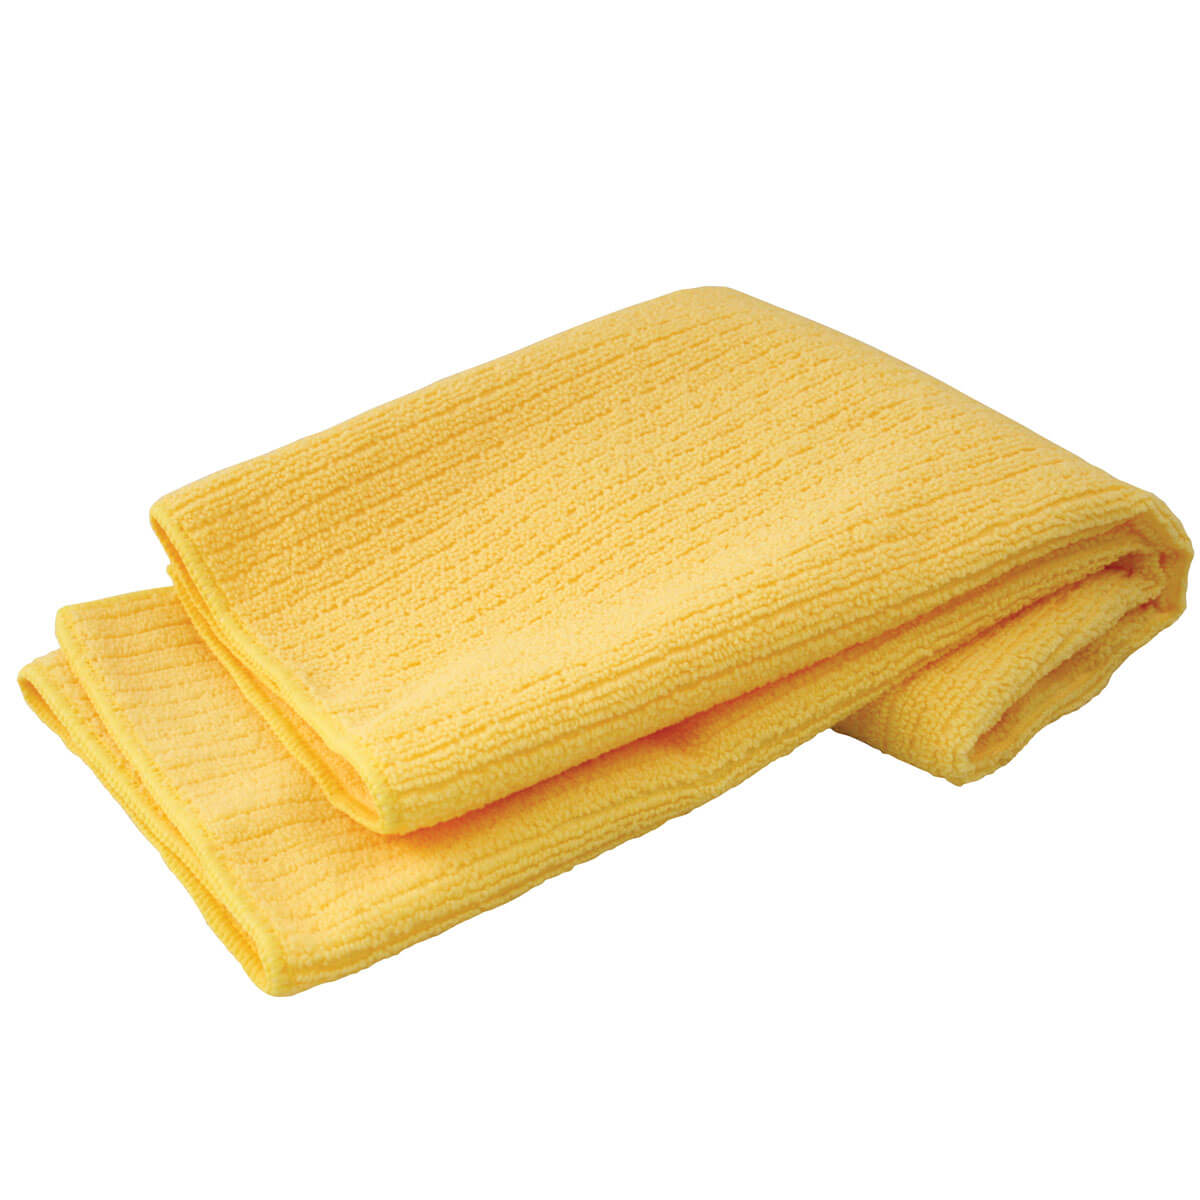 Deluxe Microfibre Large Drying Towel - 22-in x 30-in